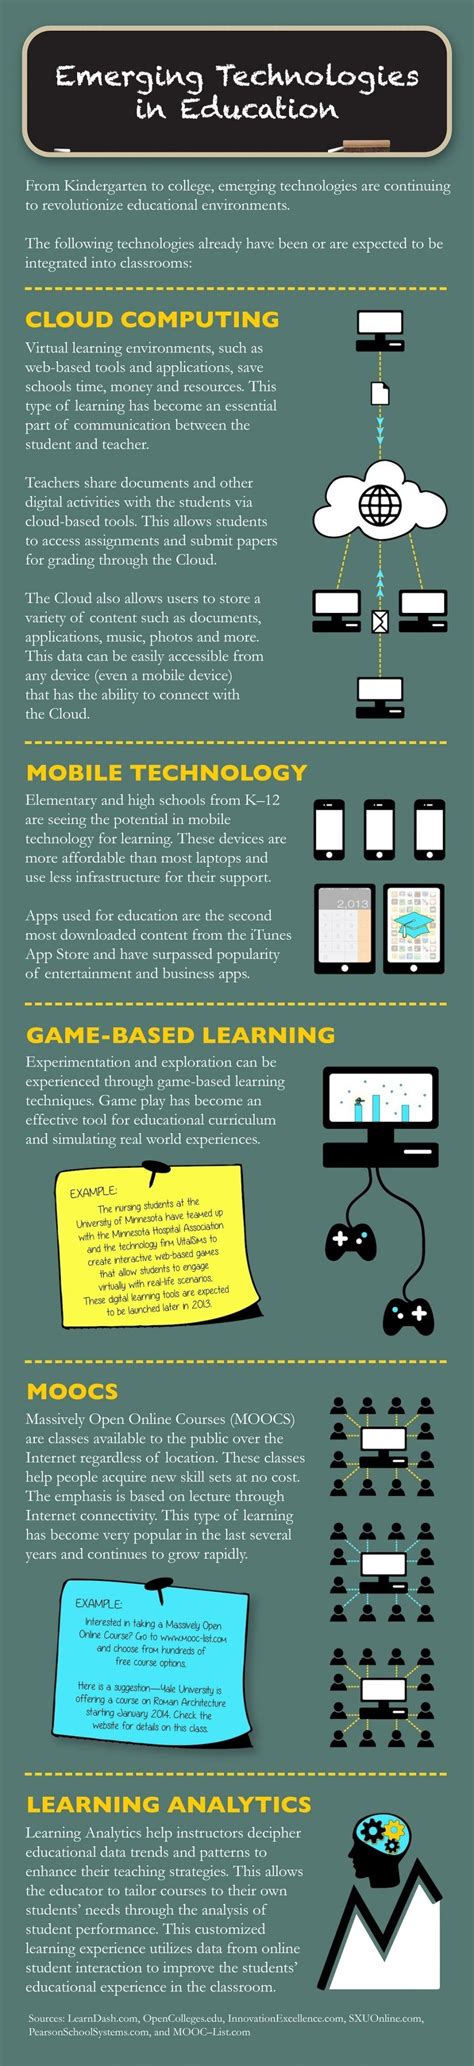 Top 5 Emerging Educational Technologies Infographic E Learning